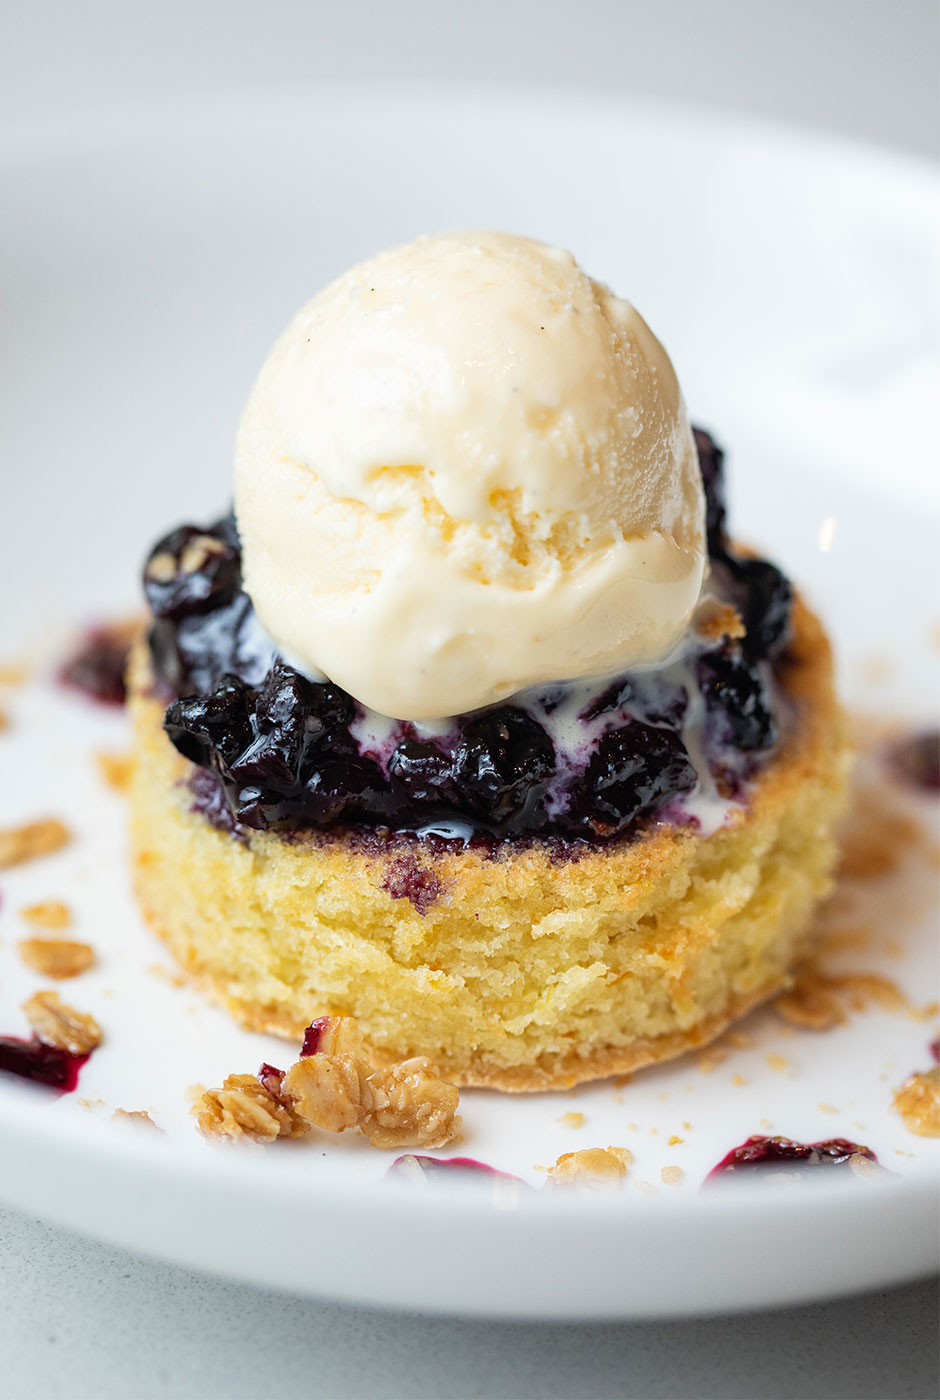 Orange Sour Cream Cake With Blueberry Compote Recipe  NYT Cooking